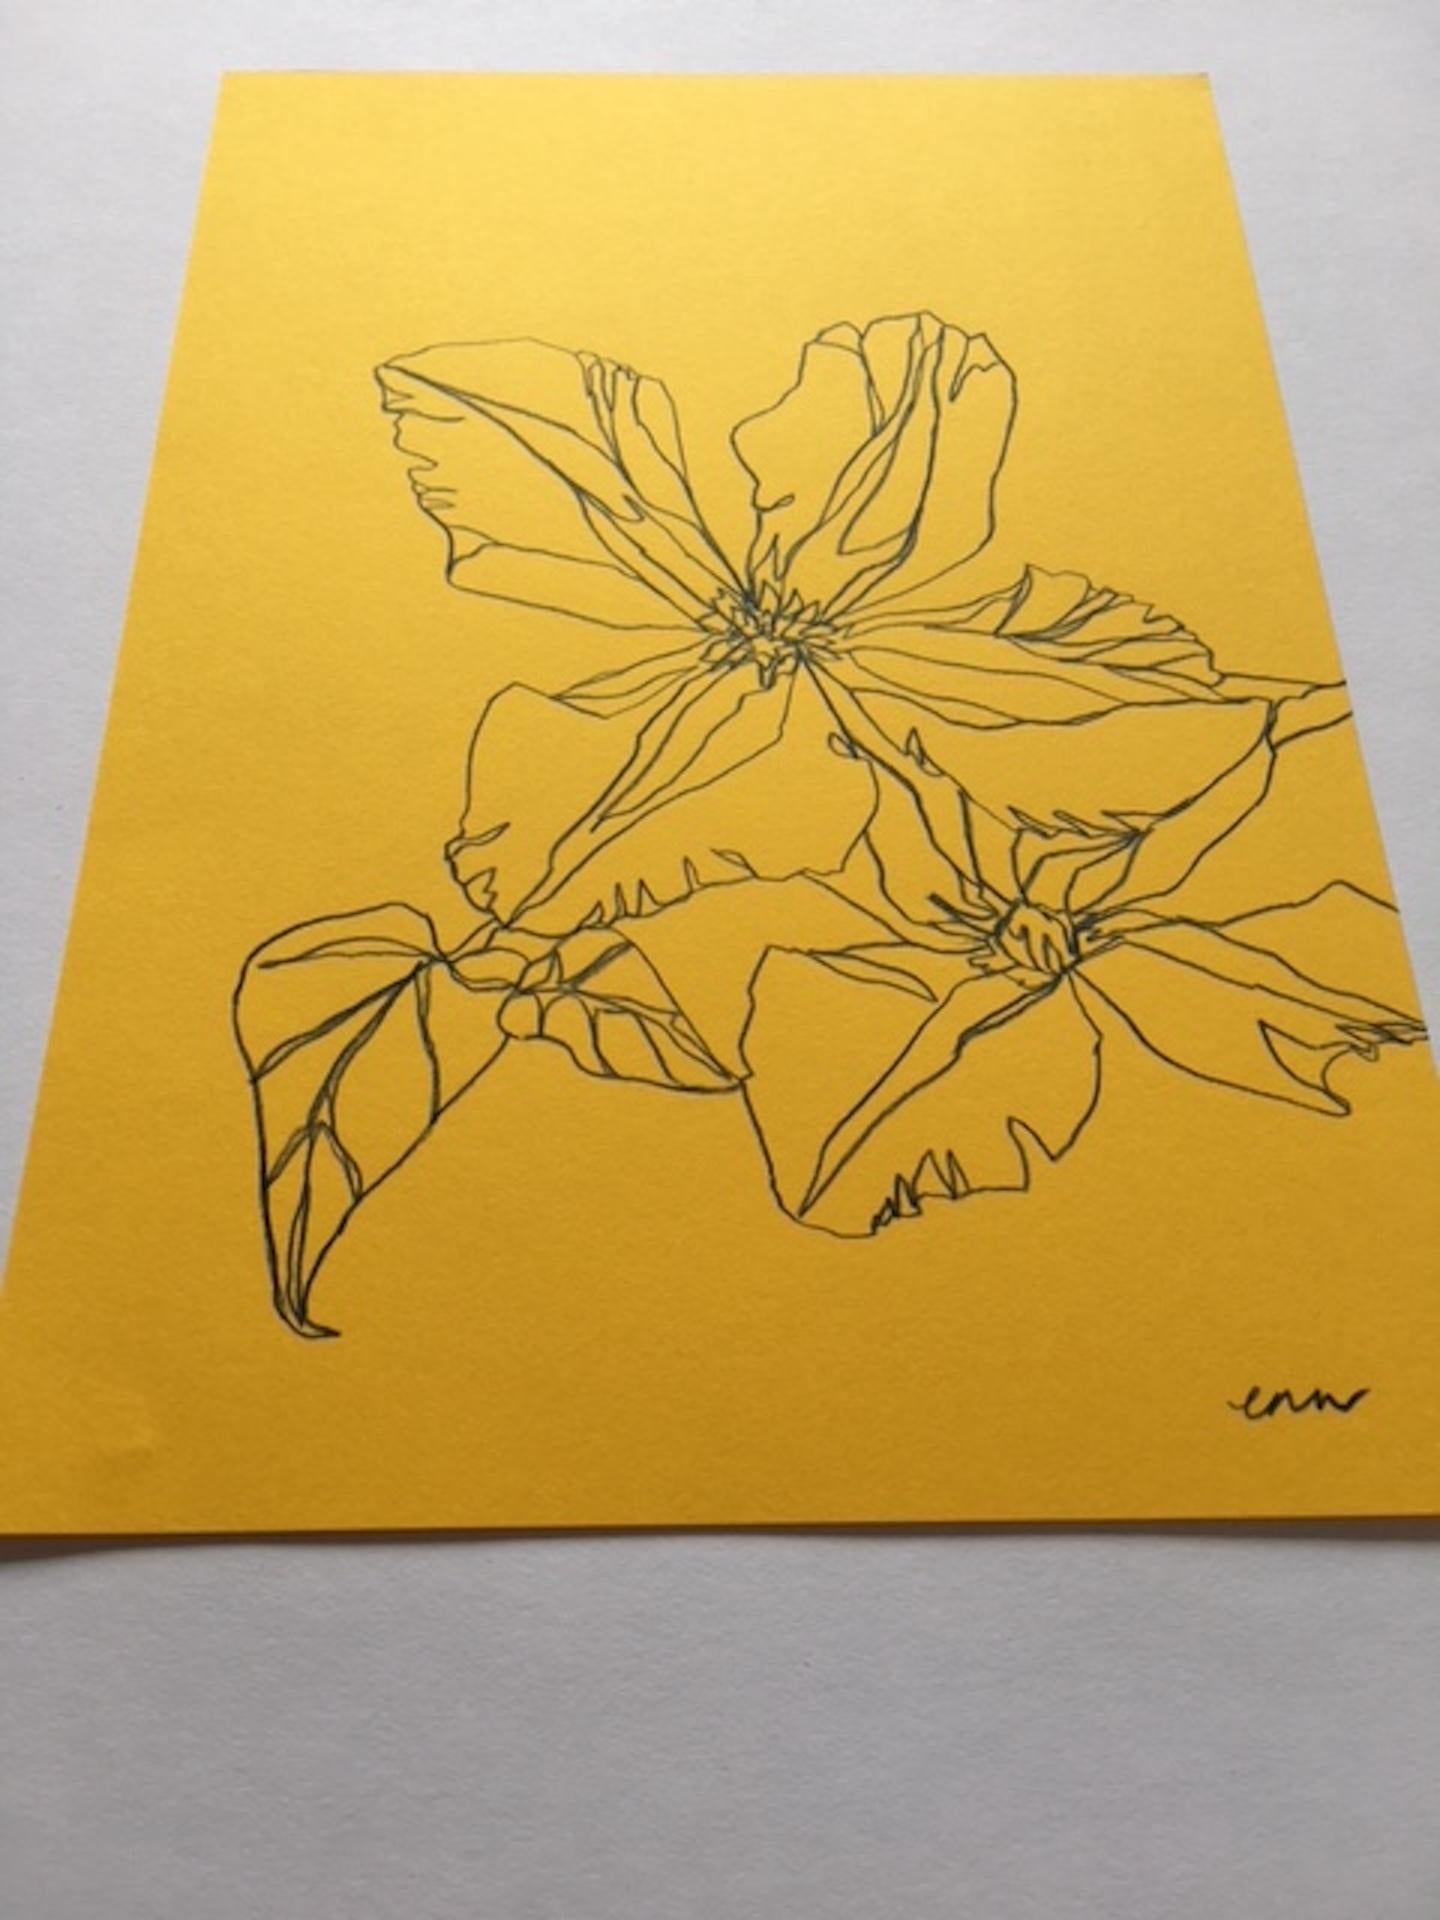 Ellen Williams
Clematis III
Original drawing – coloured pencil on A4 150gsm paper
(Please note that in situ images are purely an indication of how a piece may look).

This drawing is one in a series of botanical line drawings depicting the seasonal